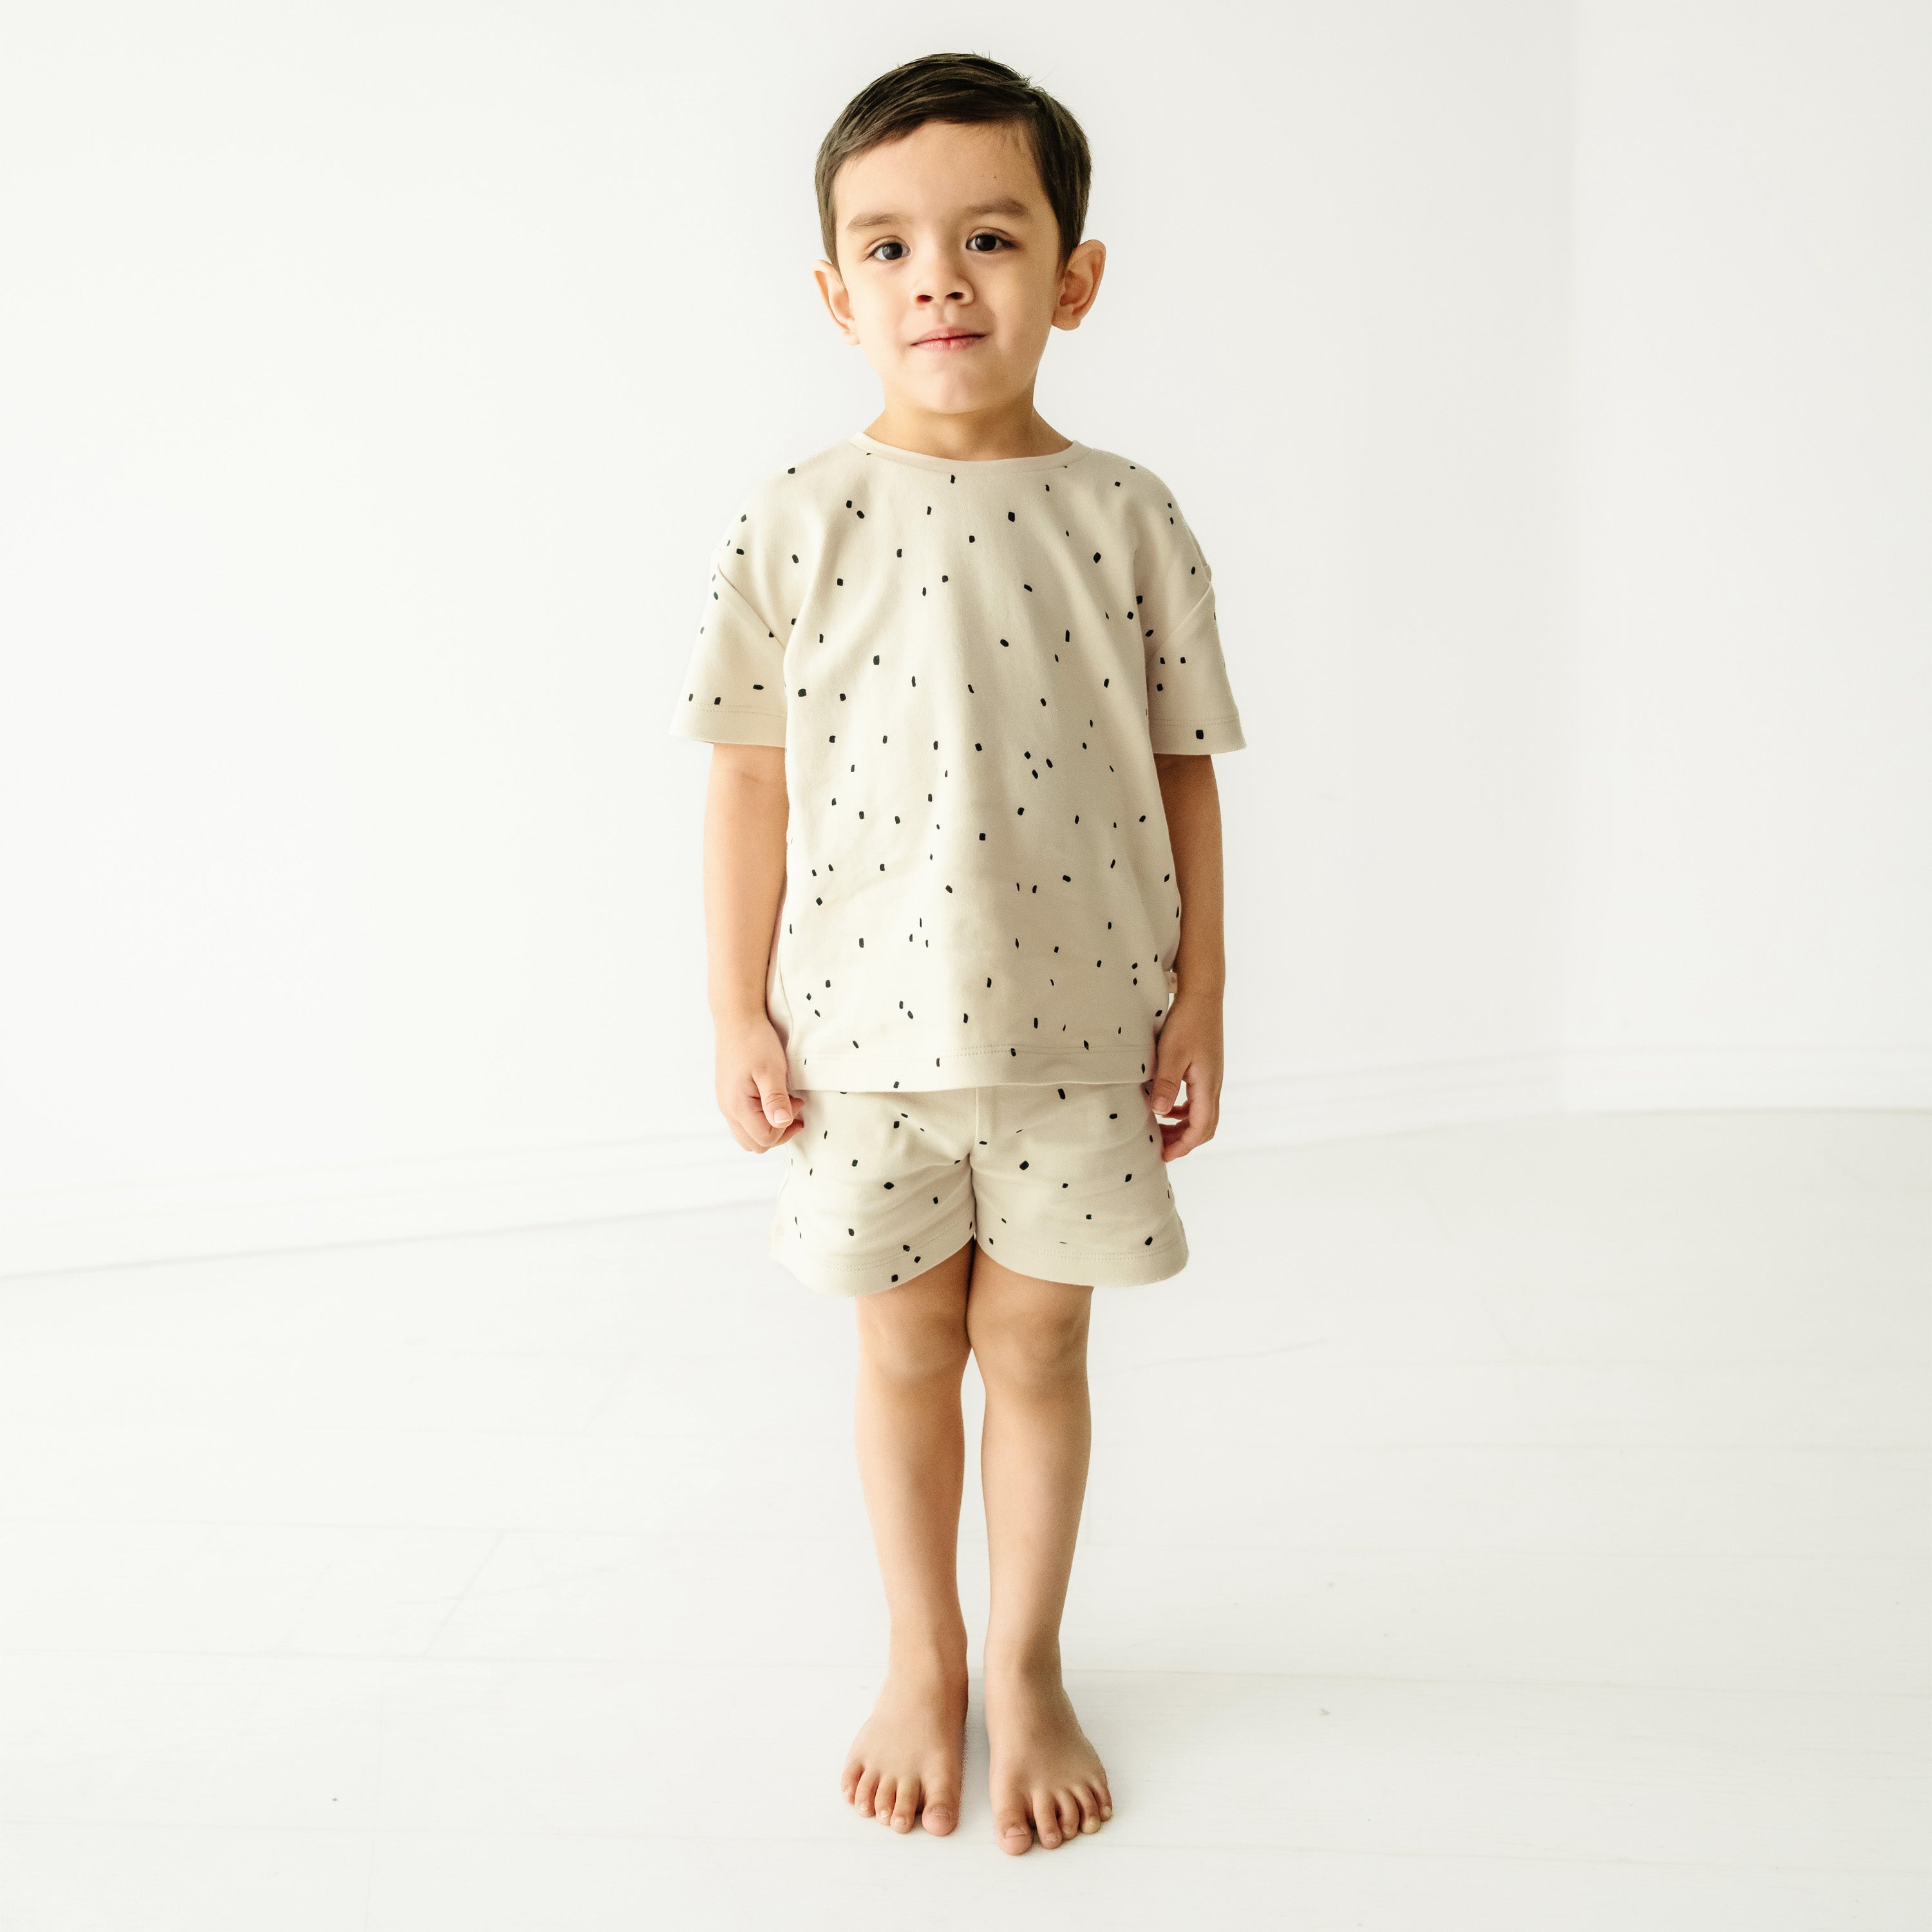 A young child wearing a Pixie Dots Organic Tee and Shorts Set from Makemake Organics stands barefoot in a bright, plain white room, looking directly at the camera.